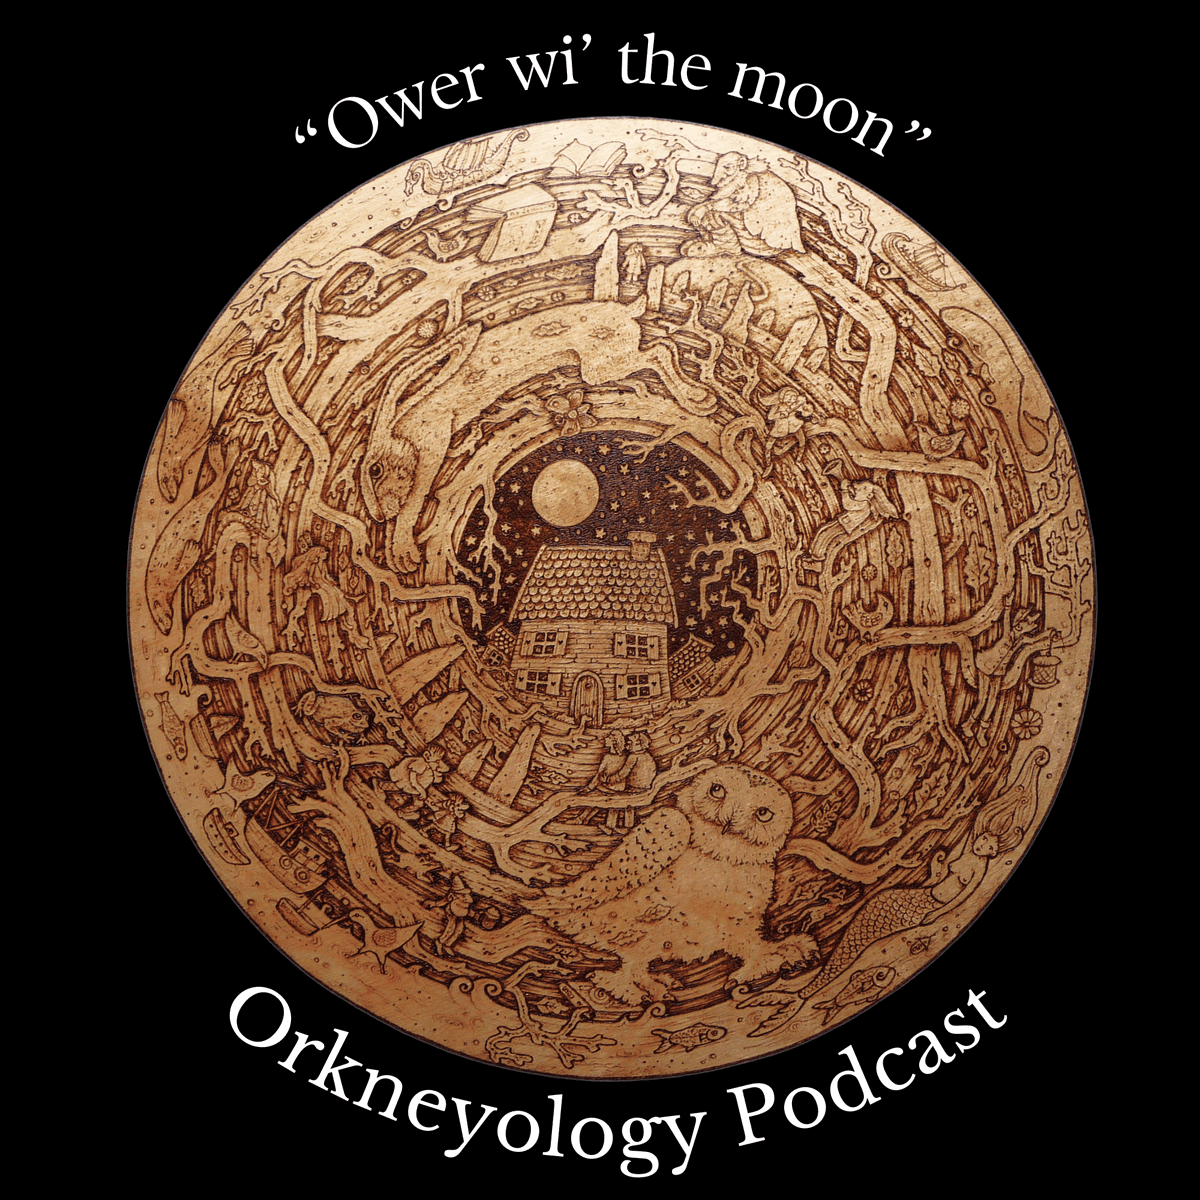 It's a full moon! You can listen to the first episode of our new Orkneyology Podcast on our website: orkneyology.com/orkneyology-po… or Youtube: youtube.com/watch?v=yqrF9j… Other podcast platforms are in the works.